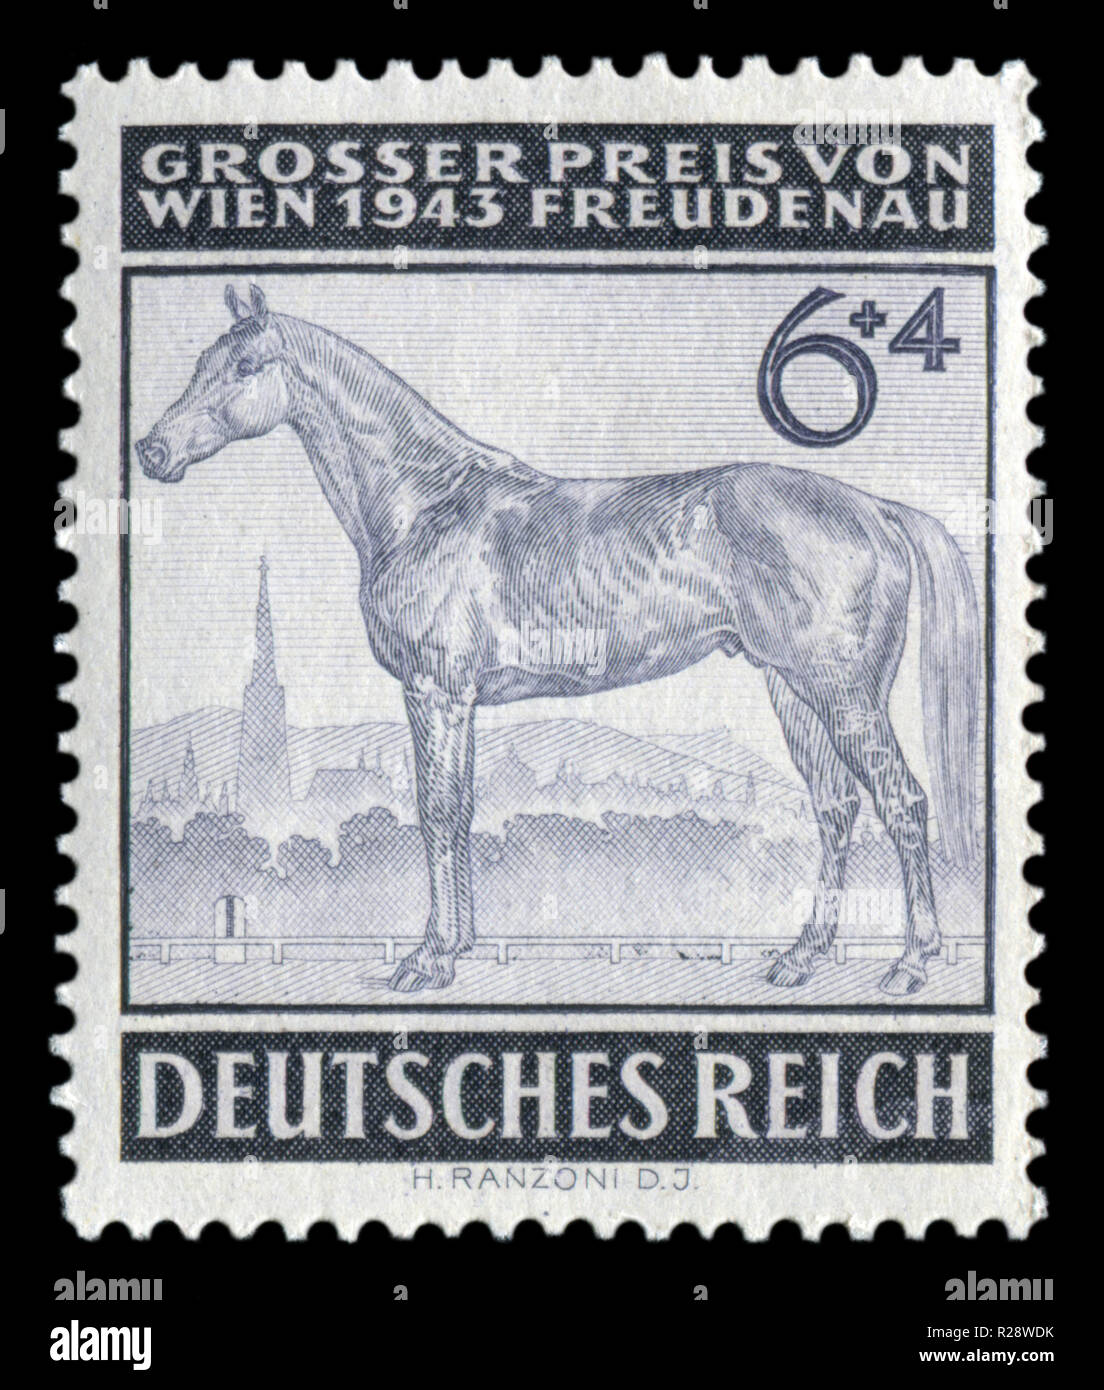 German historical stamp: Sled horse 6+4 pf. Grand Prix Vienna 1943. Isolated on black background,  Germany-Austria, the Third Reich Stock Photo